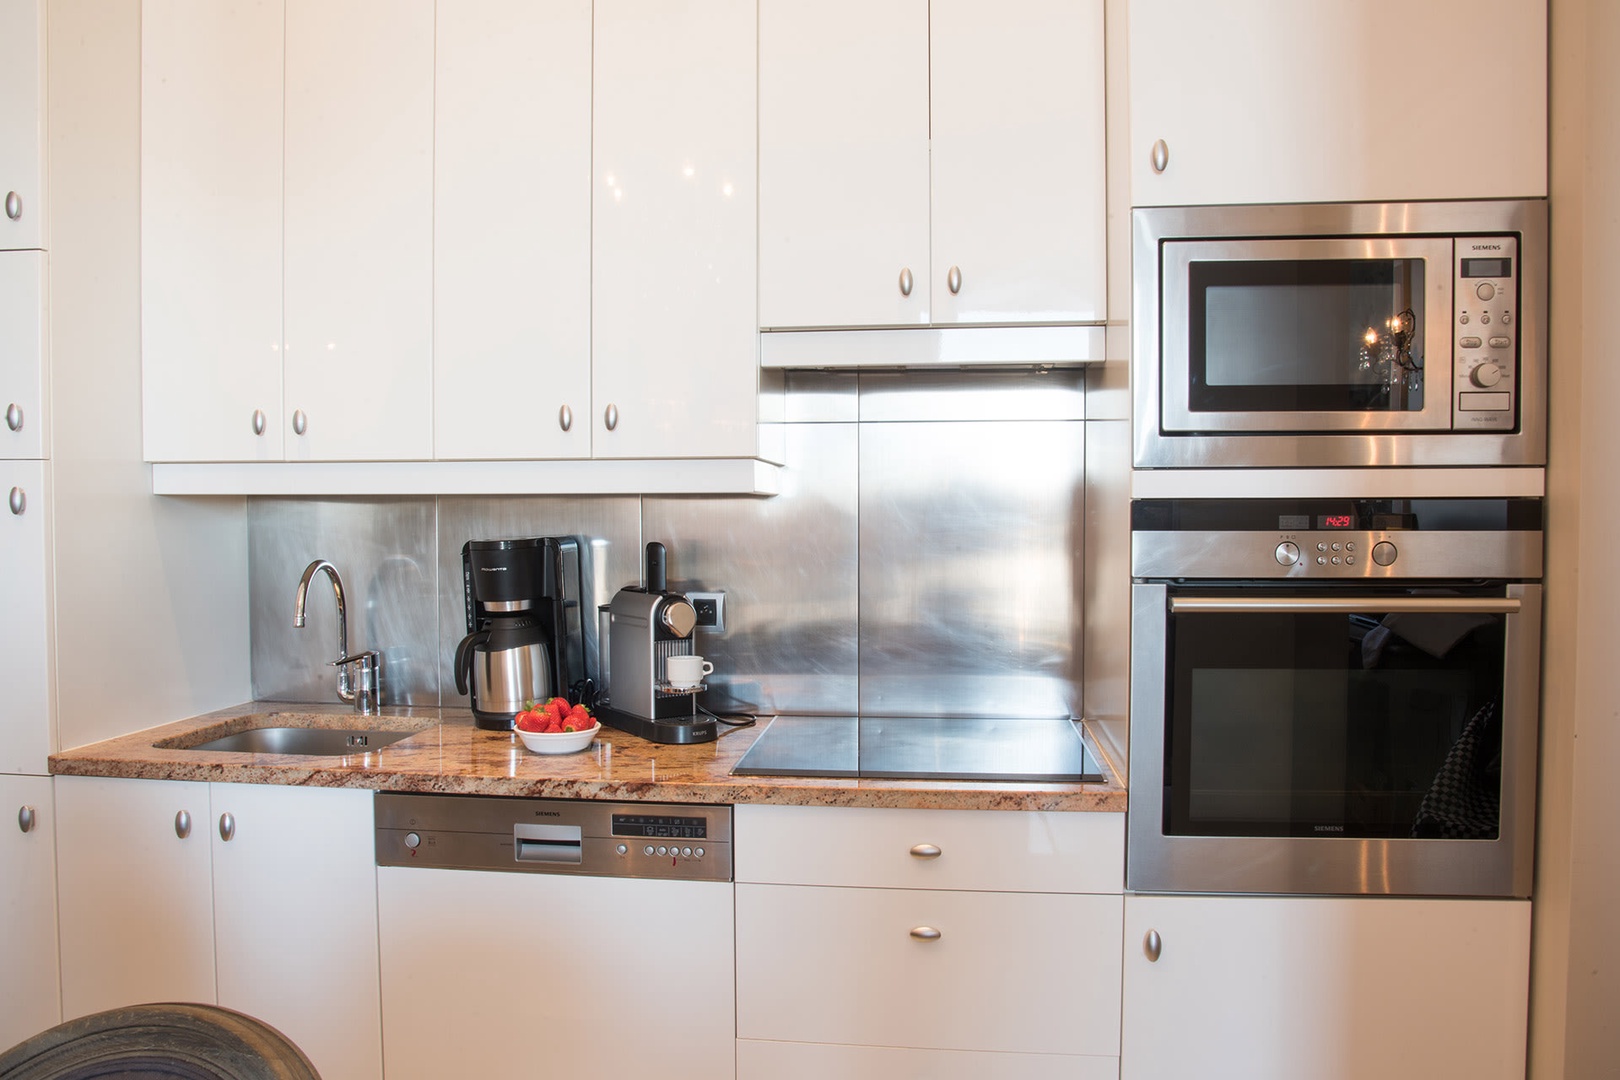 The modern and stylish kitchen is fully equipped with everything you need.